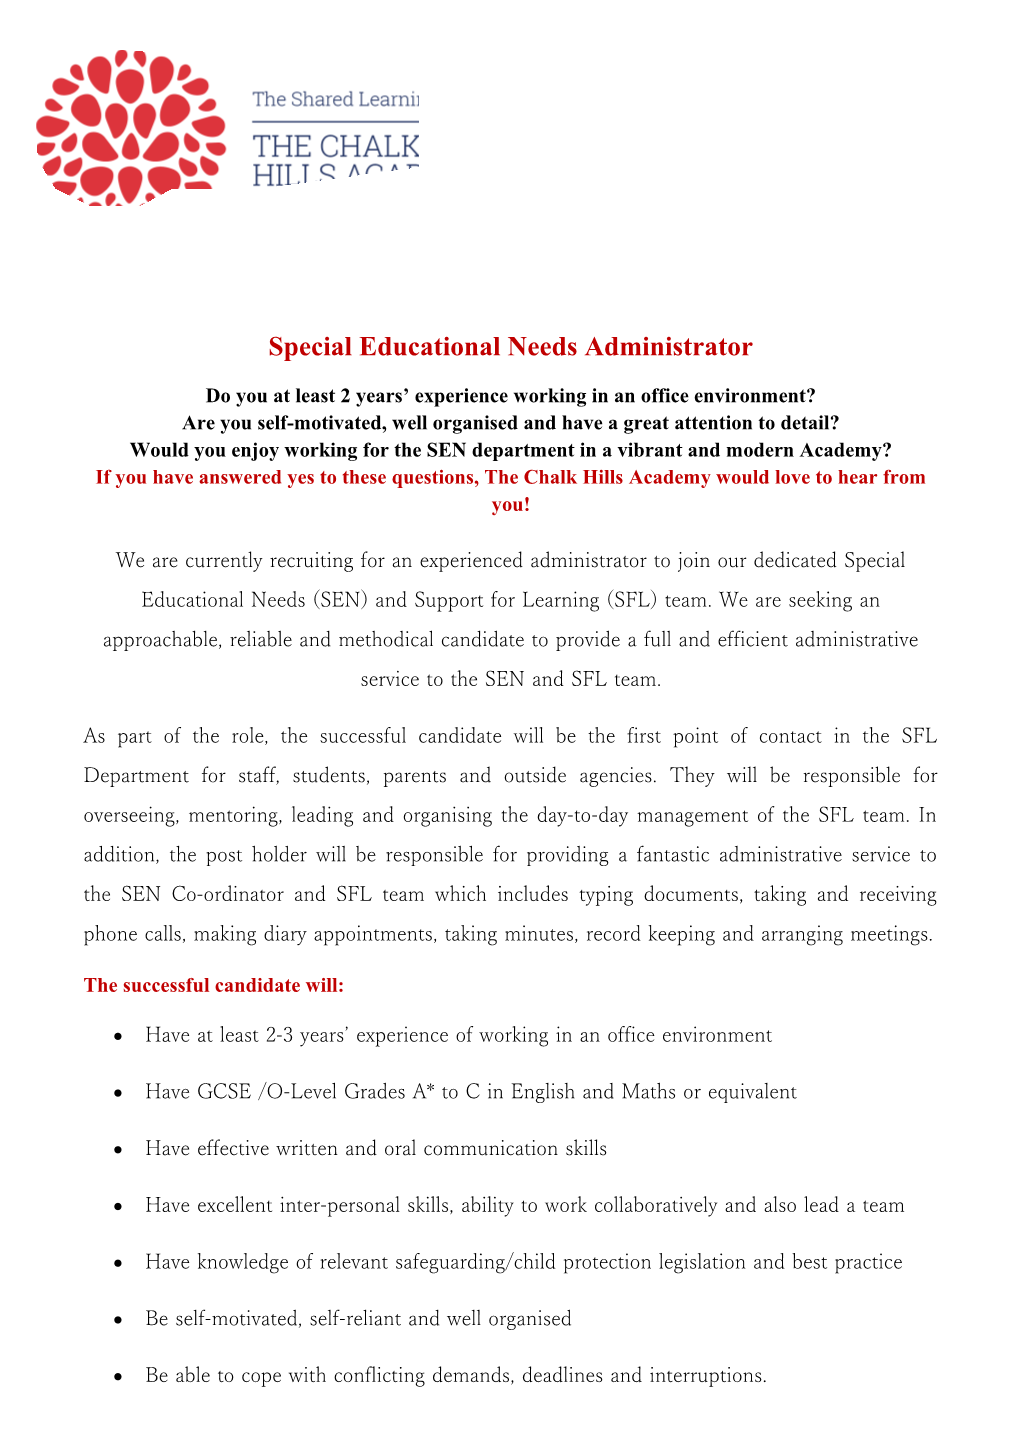 Special Educational Needs Administrator